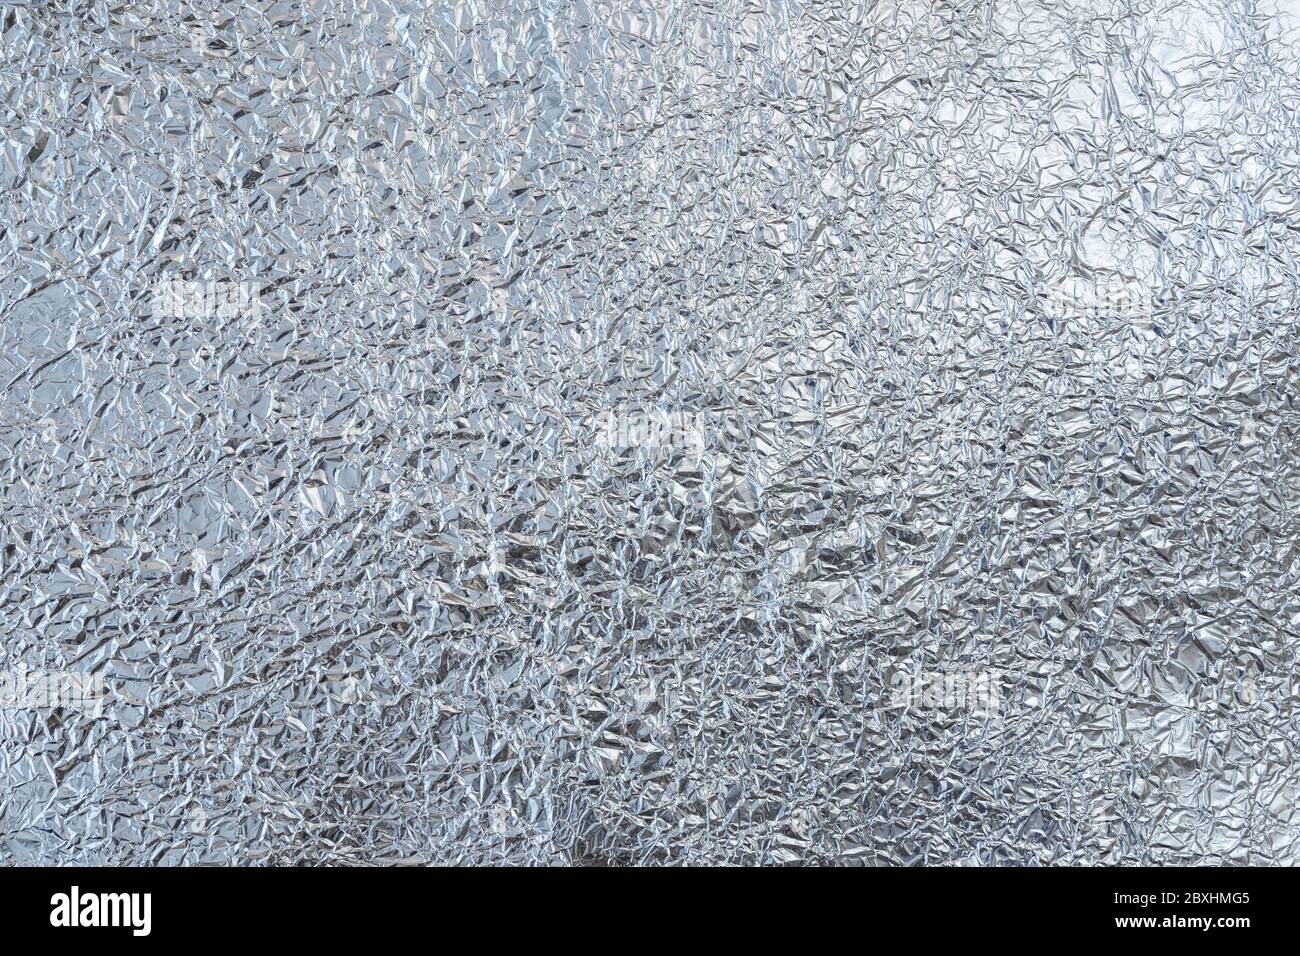 Crumpled tin foil surface, top view. Abstract full frame textured silvery background. Stock Photo